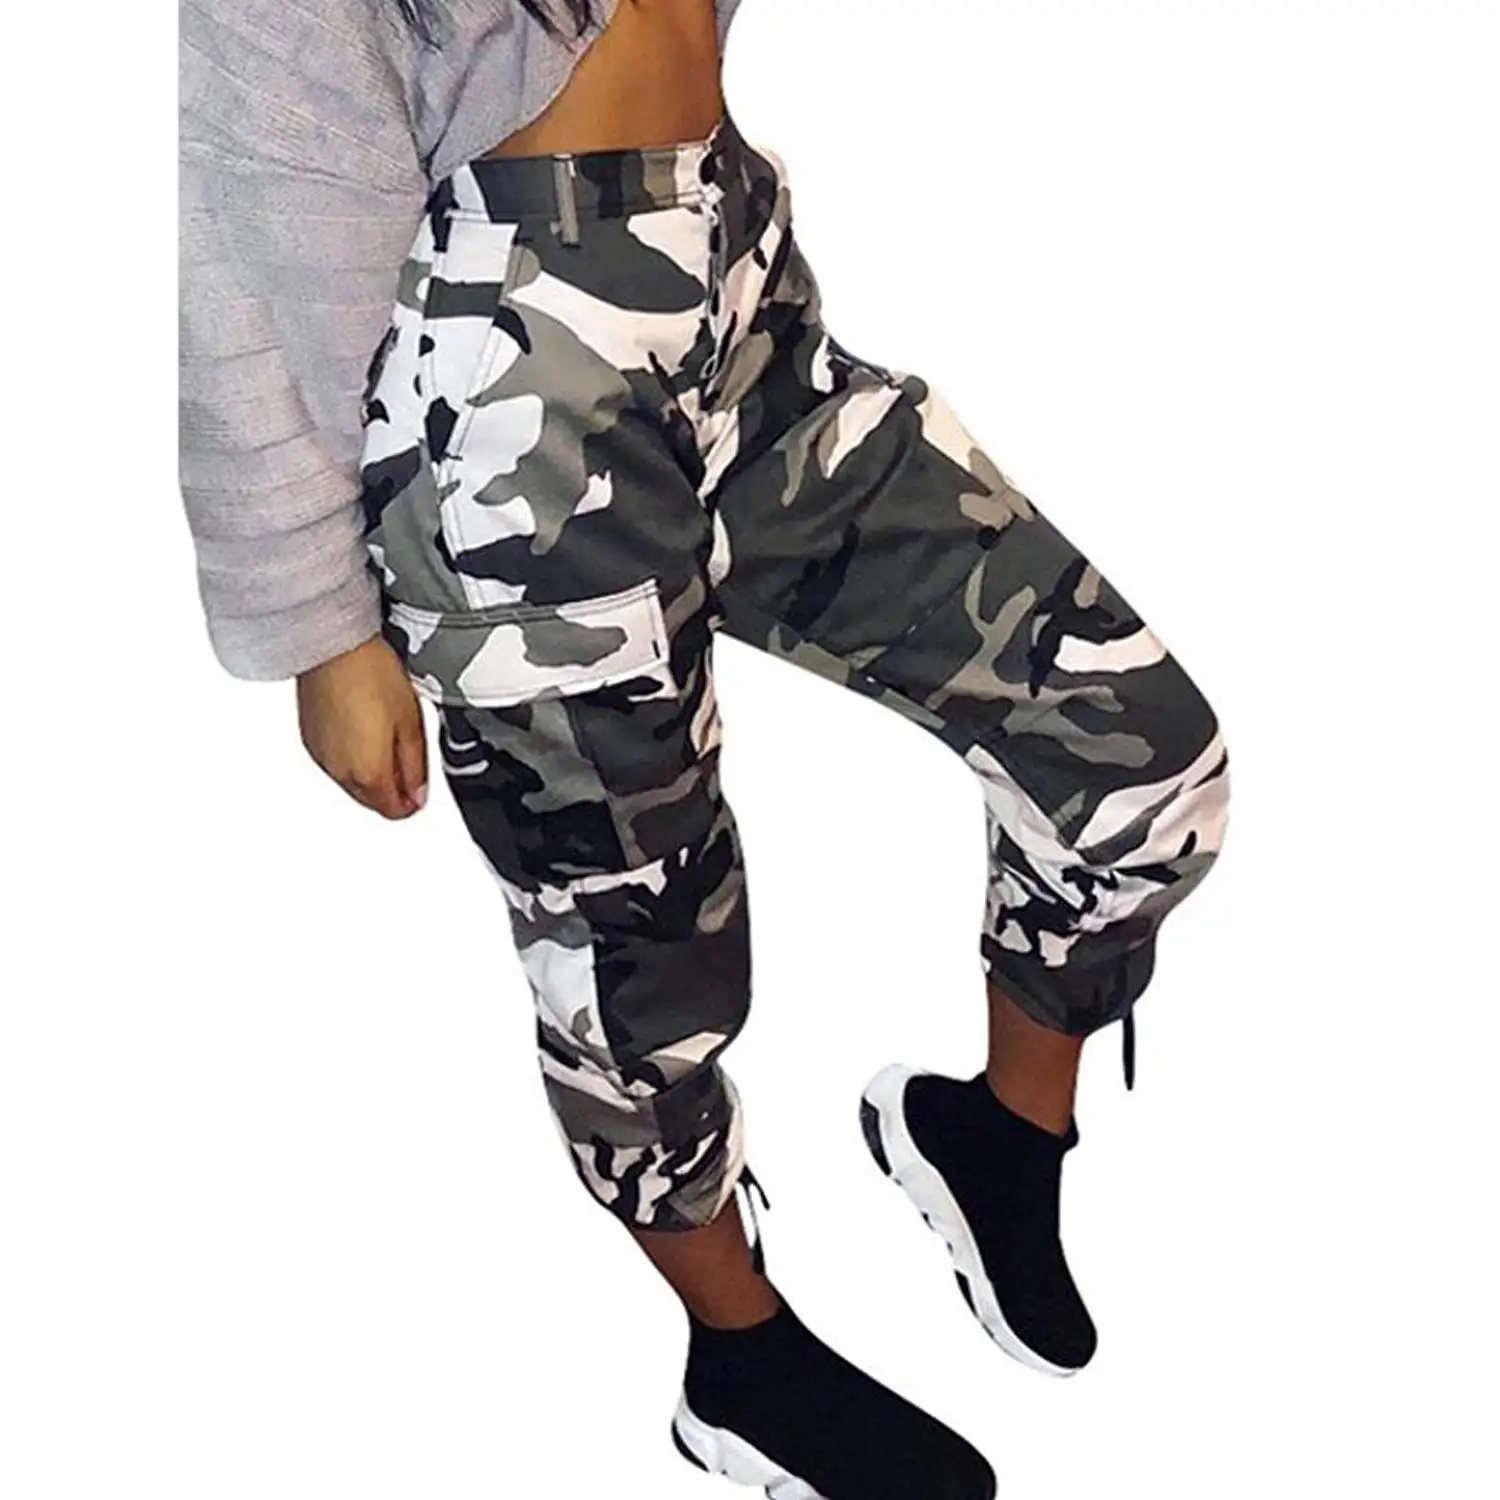 womens camouflage trousers uk